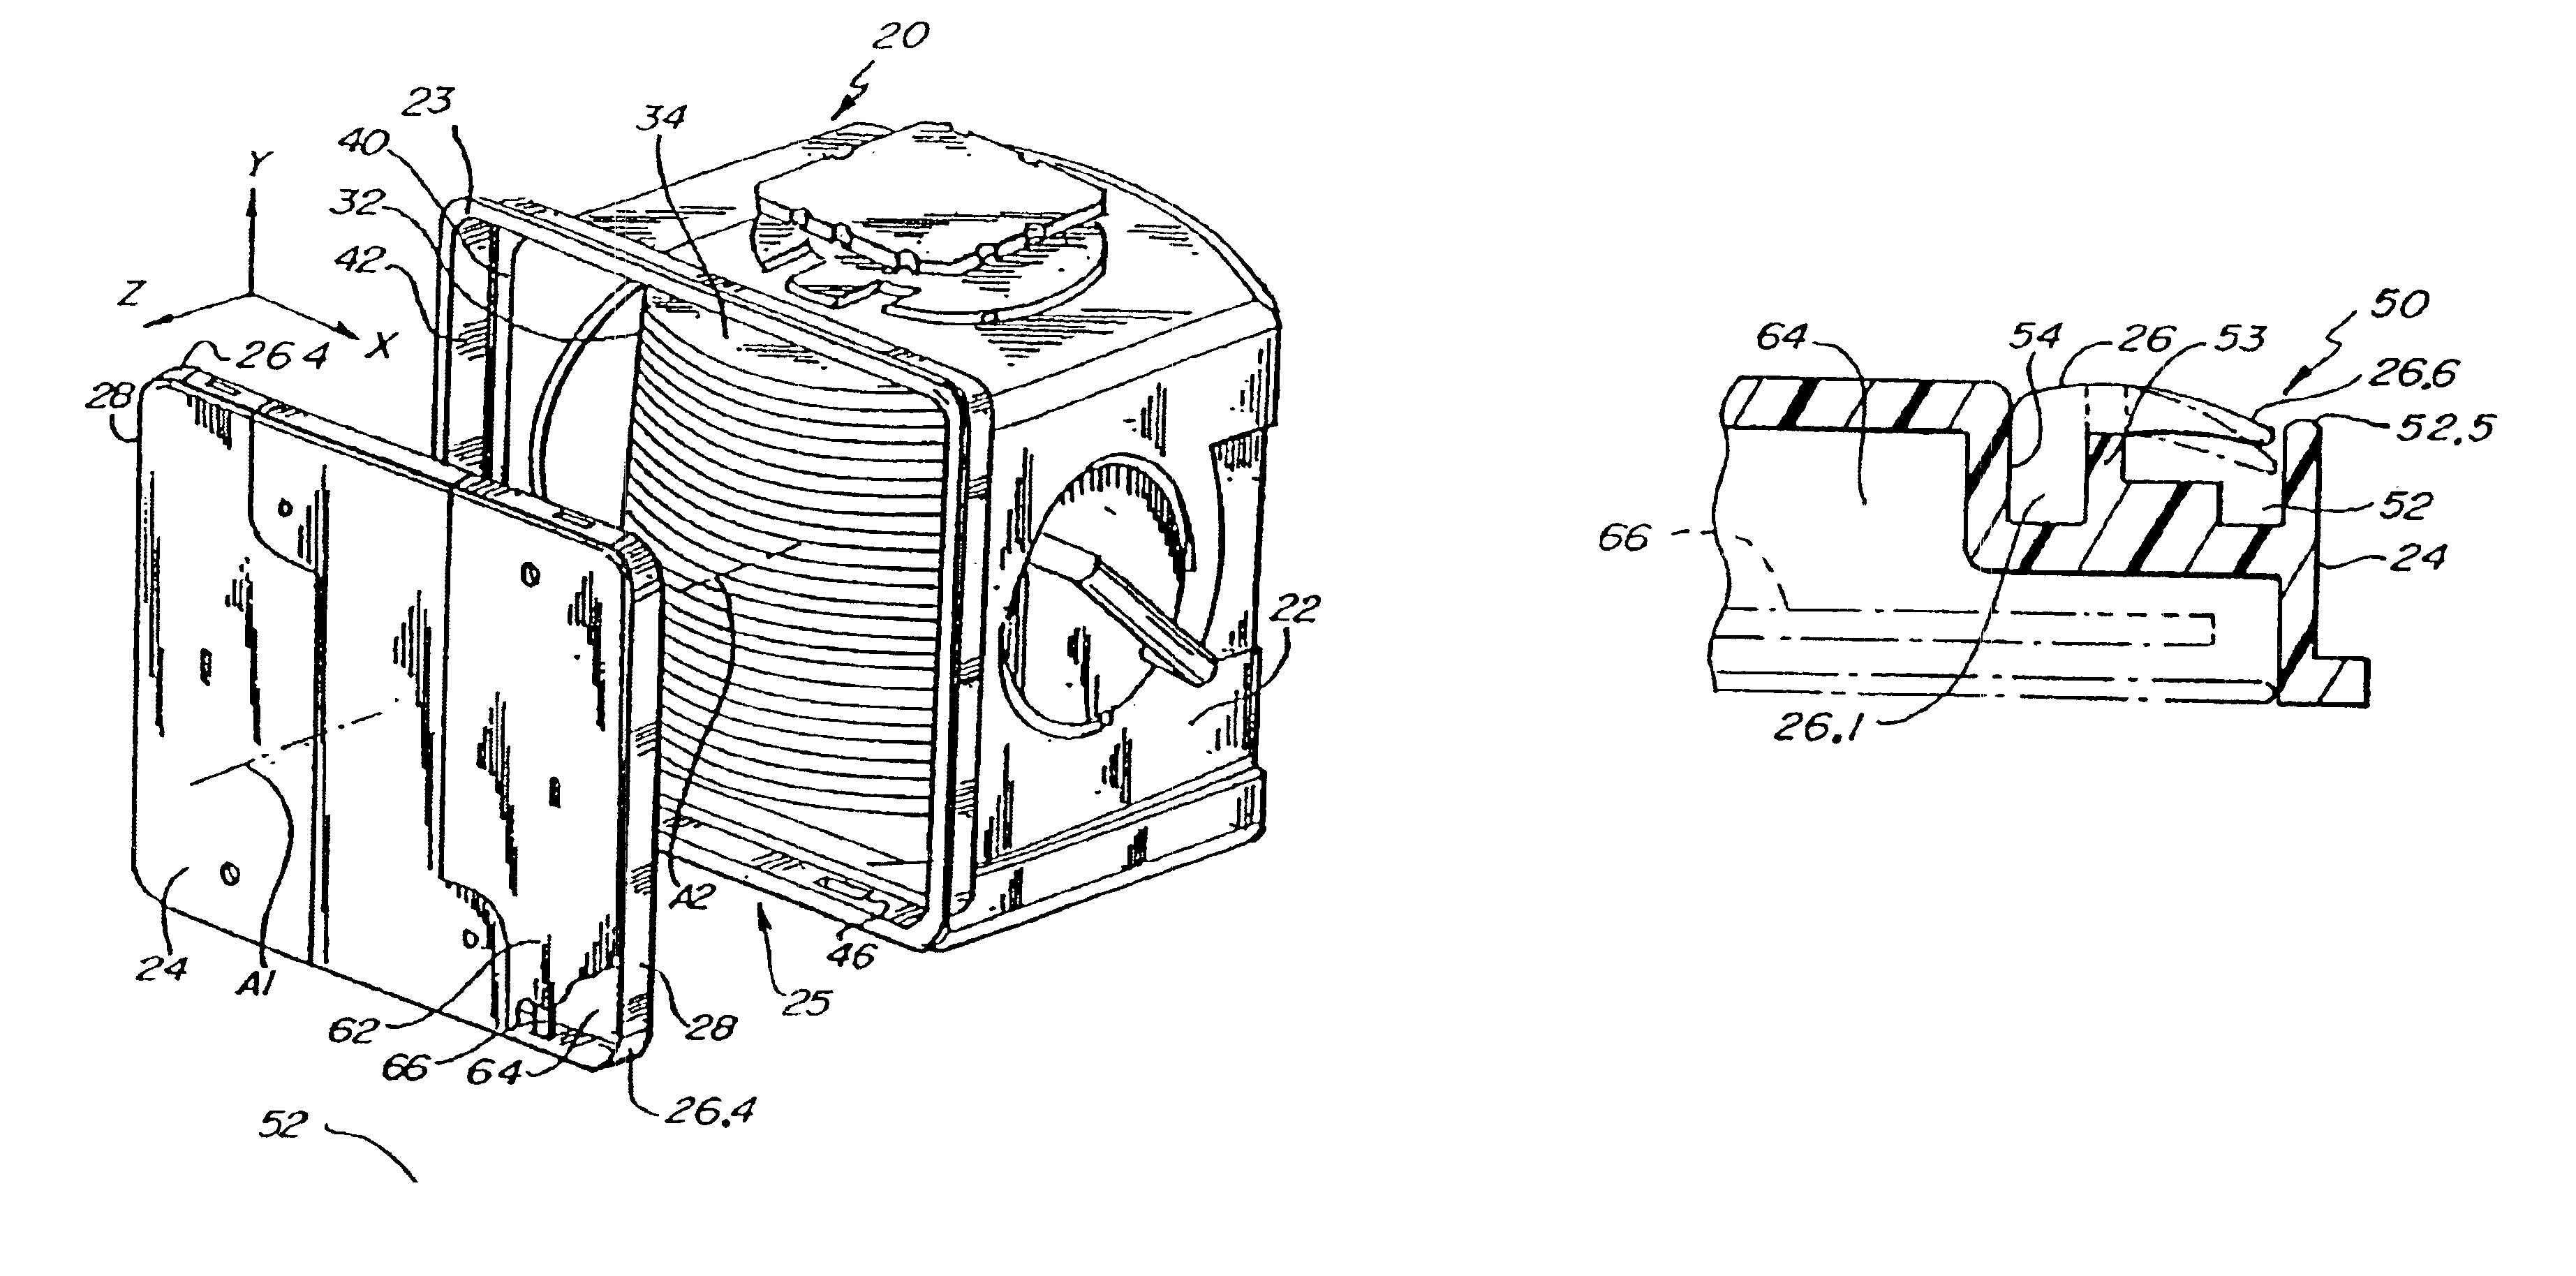 Wafer enclosure sealing arrangement for wafer containers